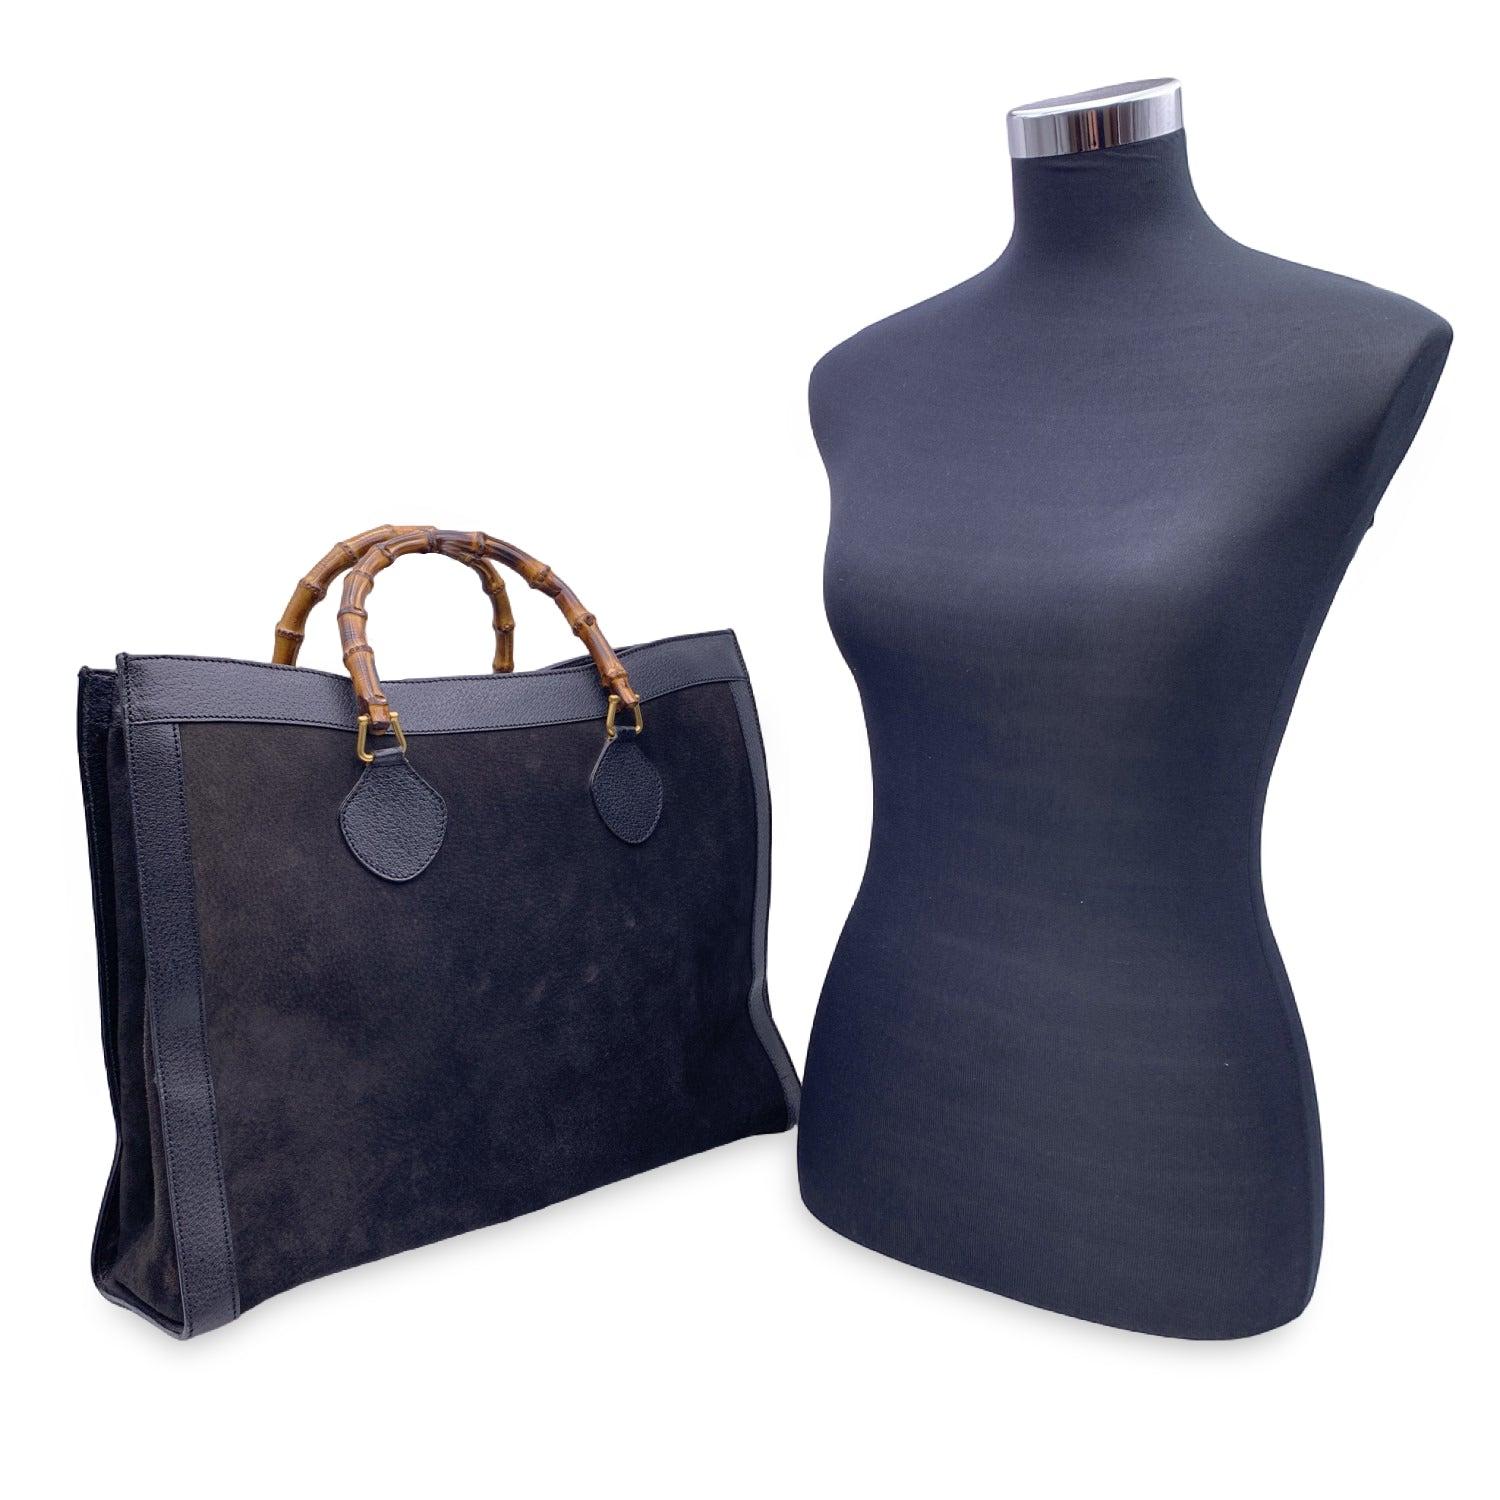 Beautiful Gucci Bamboo Maxi XL tote bag in black suede and leather. Double distinctive Bamboo handle. Princess Diana, was snapped carrying a this model on several occasions. Magnetic button closure on top. 5 bottom feet. Gold metal hardware. 2 main